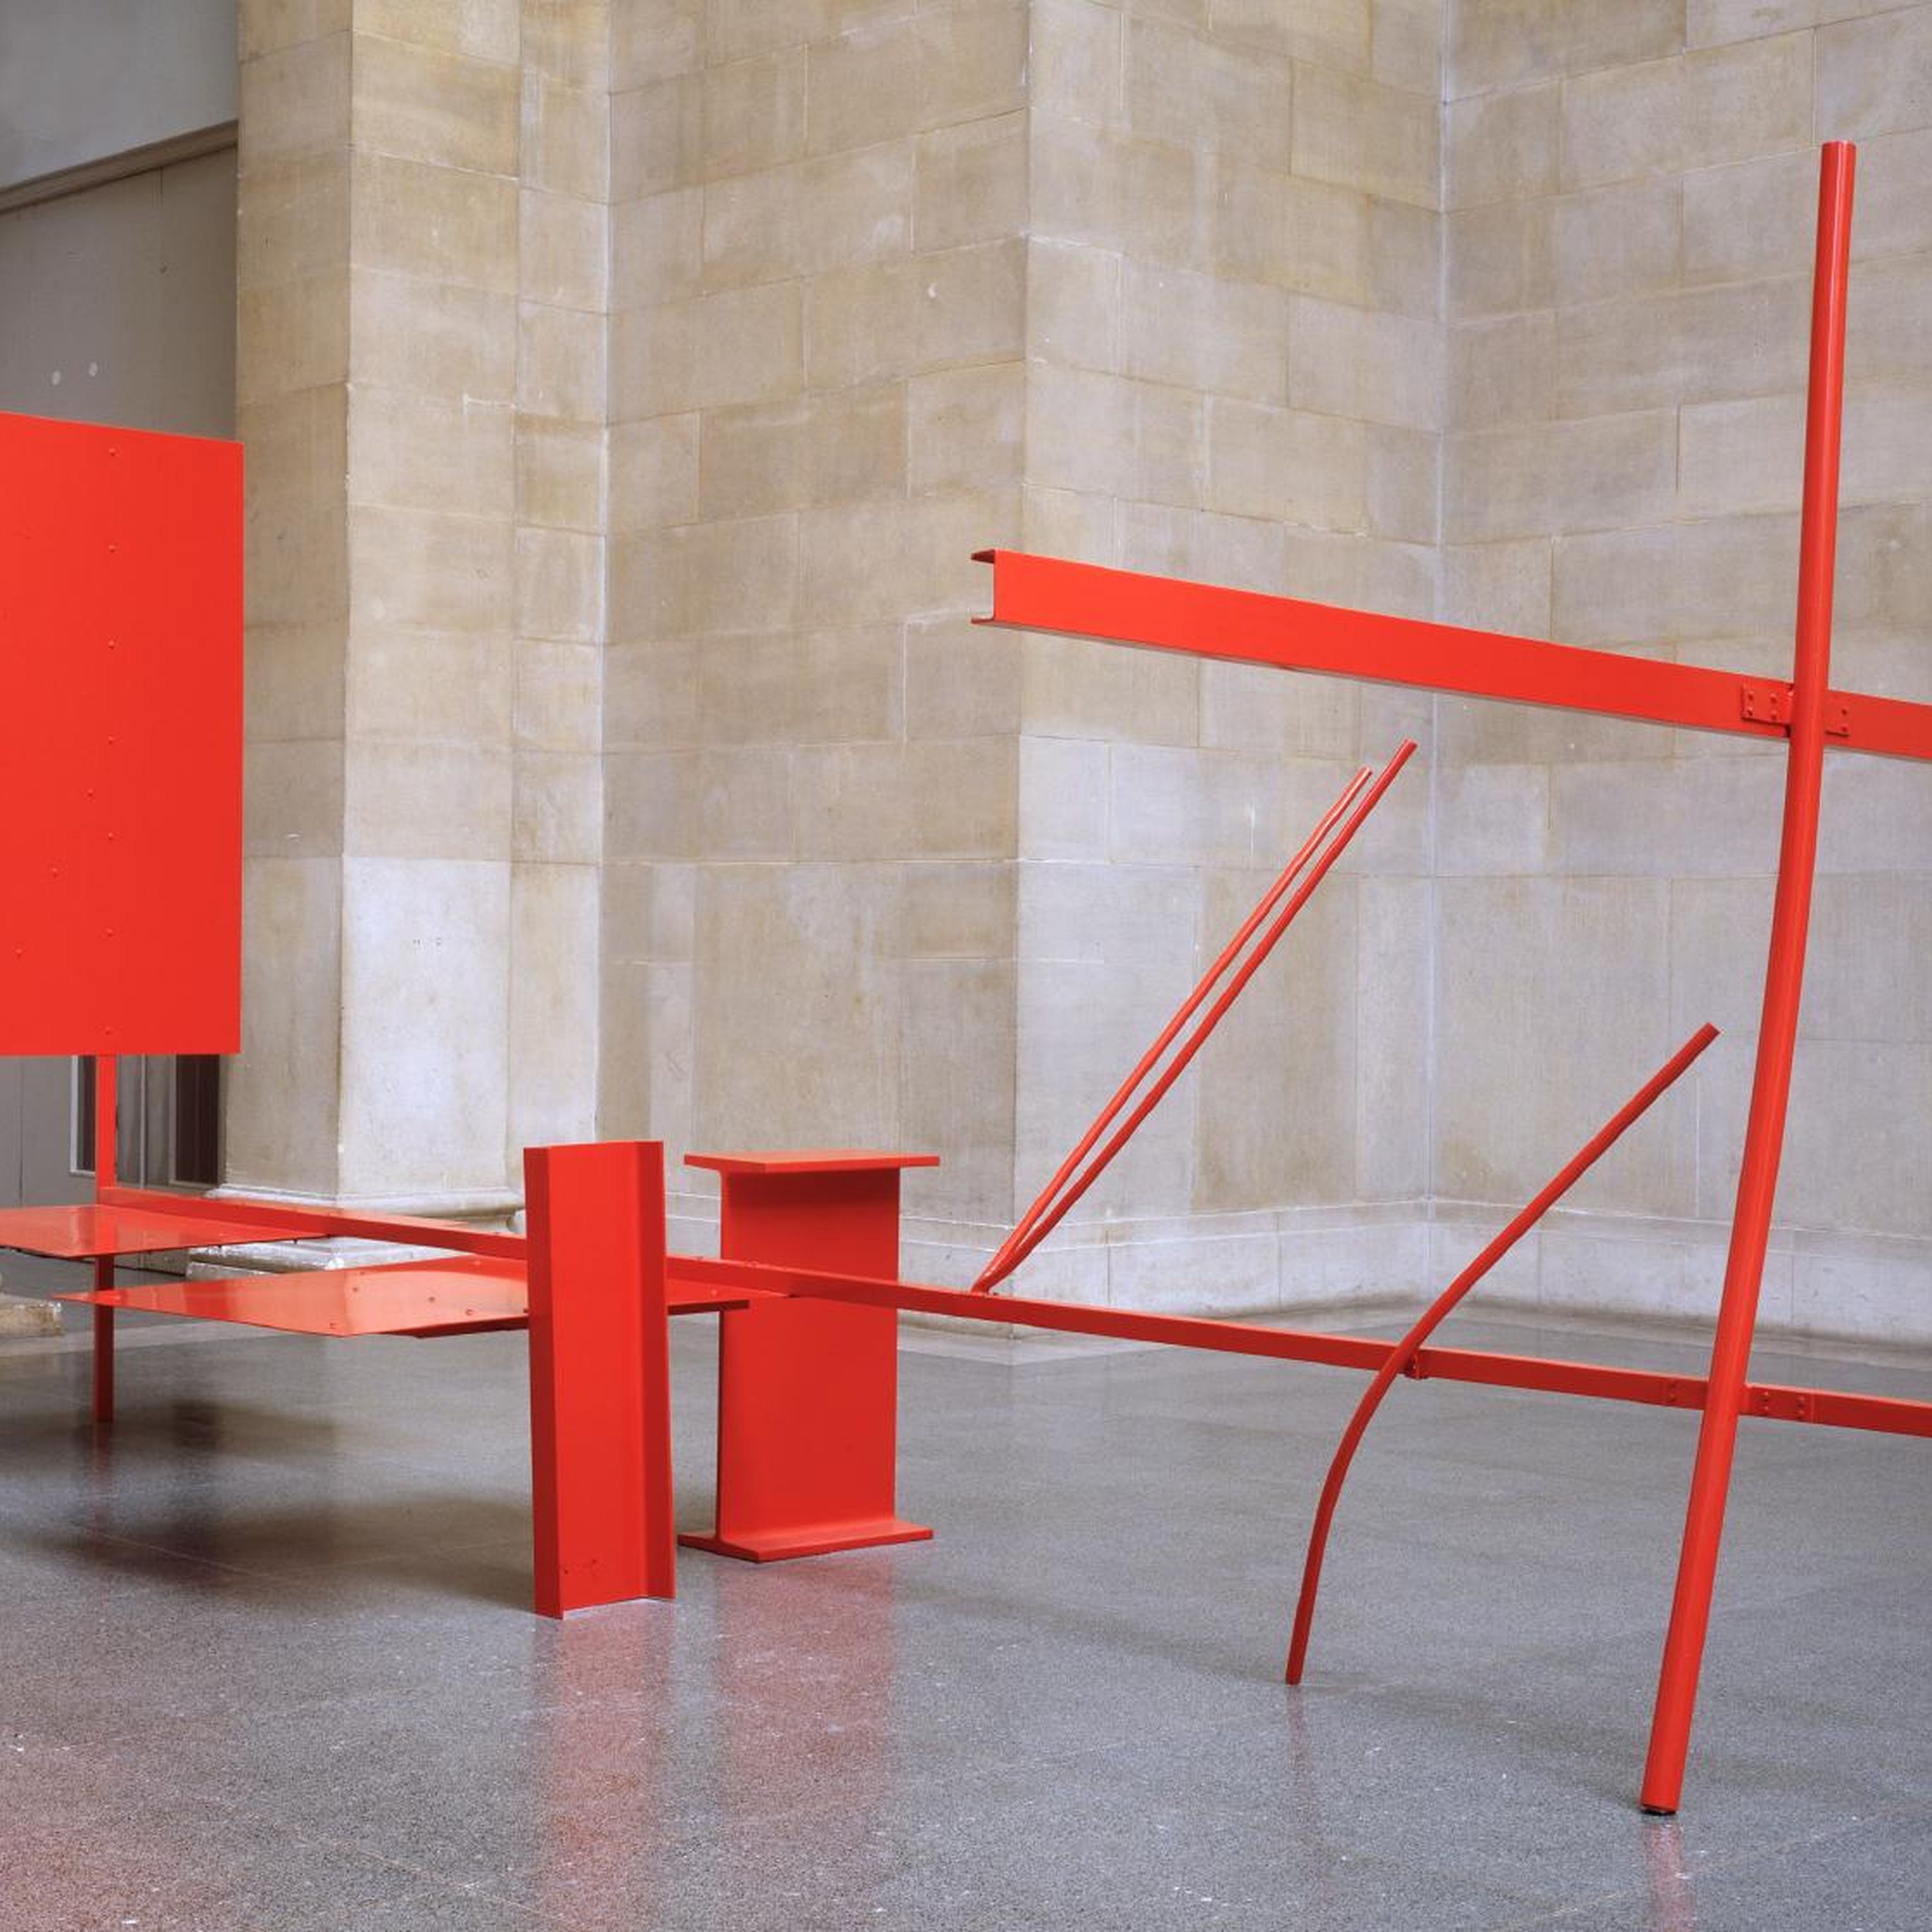 Early One Morning by Sir Anthony Caro – with Alistair Sooke